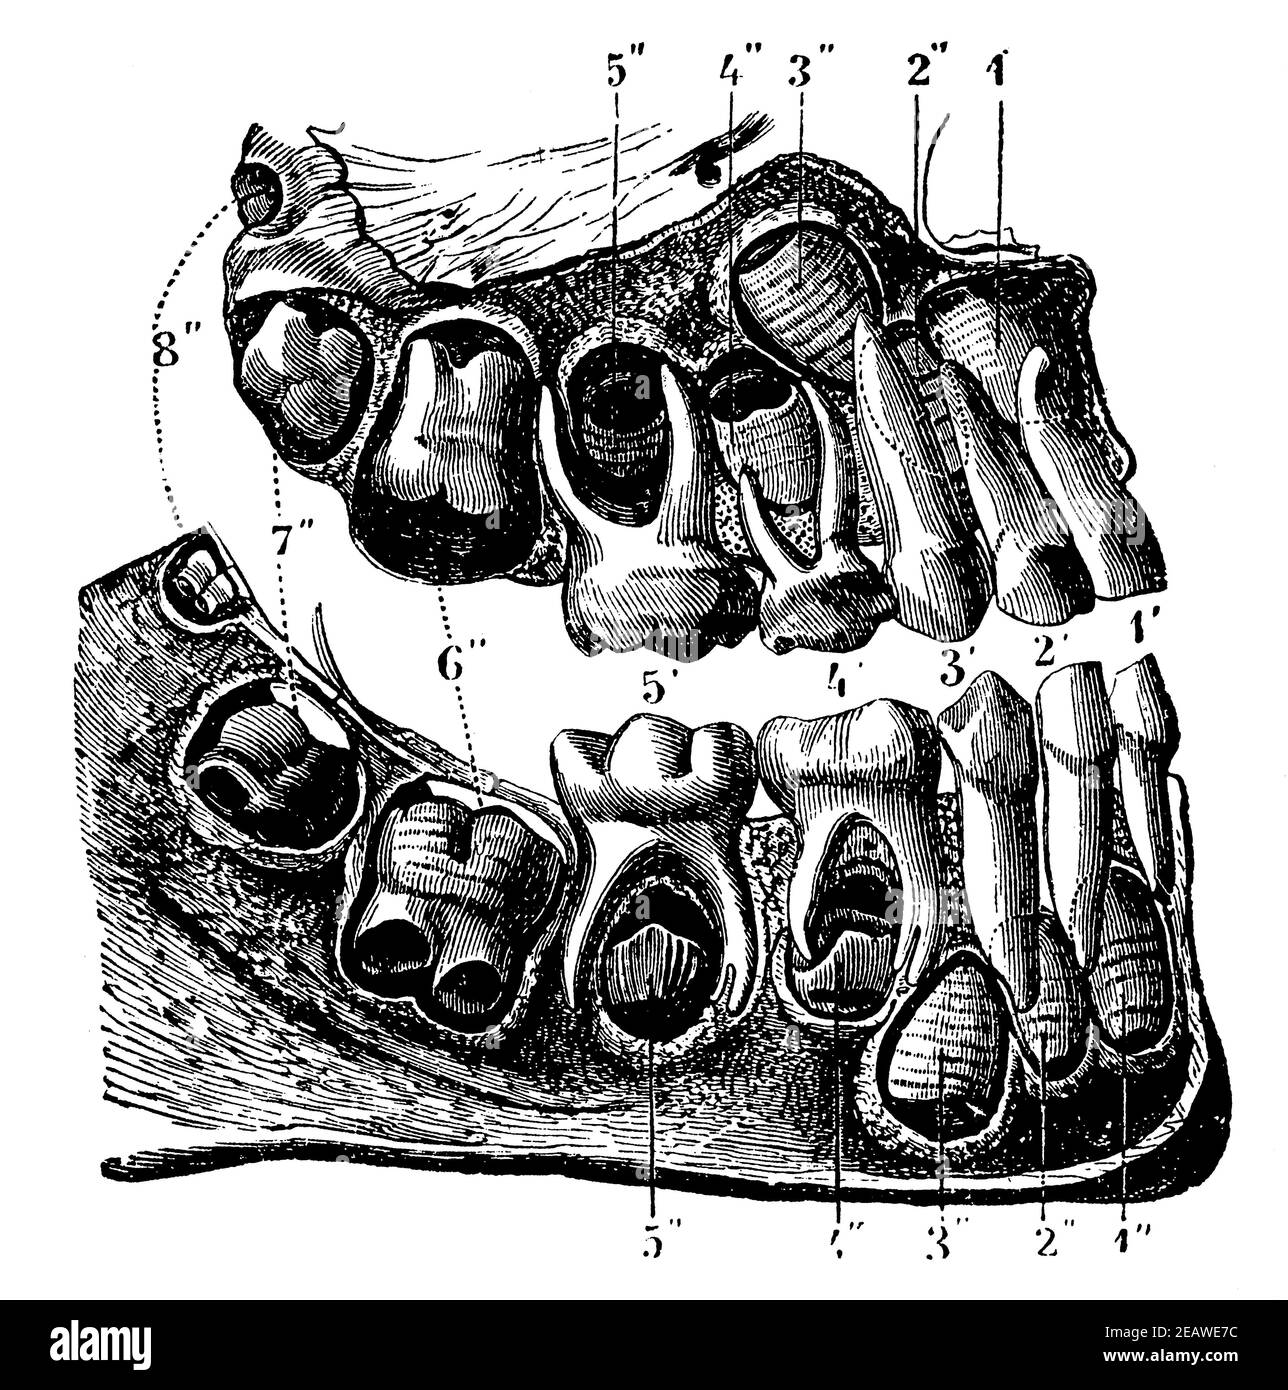 First teeth of the child, the roots of which are bared to show the germs of the second teeth. Illustration of the 19th century. Germany. White background. Stock Photo